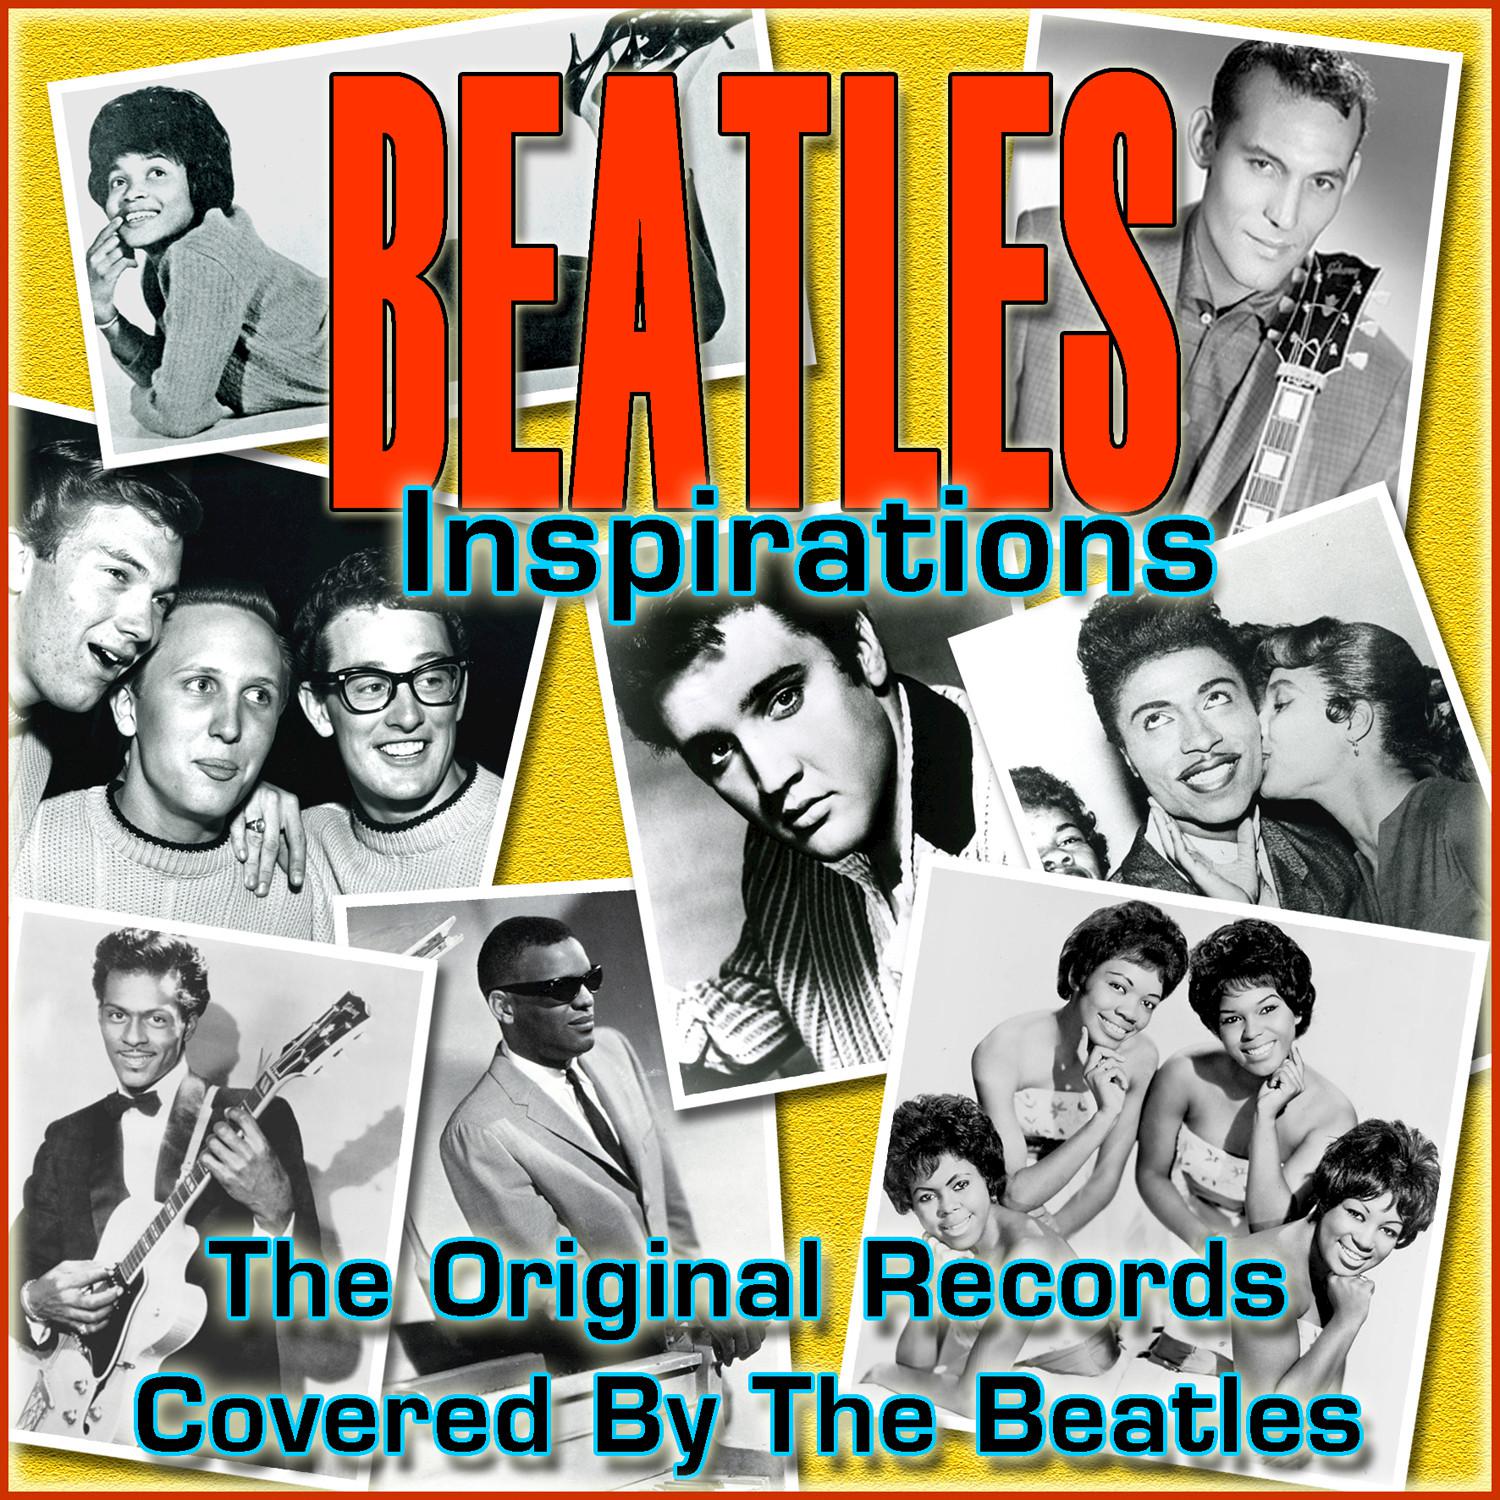 Beatles Inspirations - The Original Records Covered by the Beatles